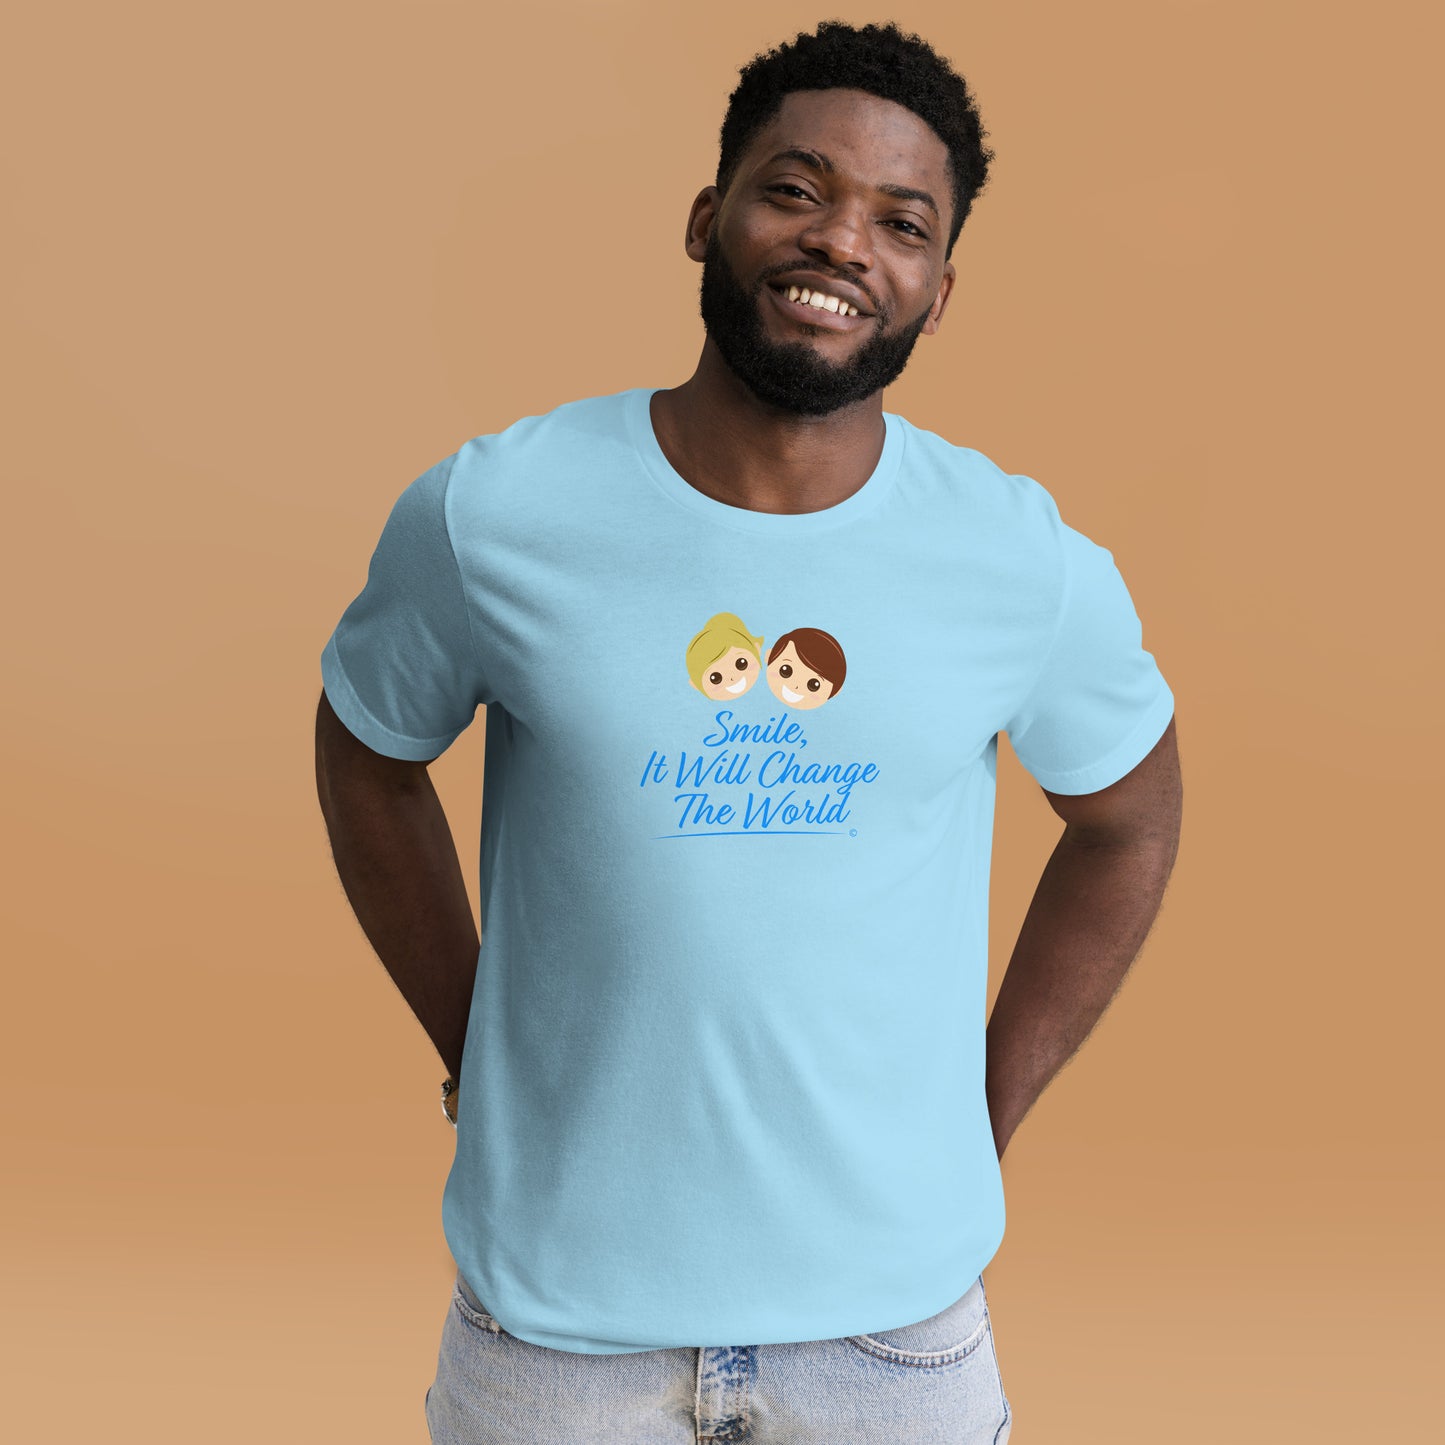 Smile, It Will Change The World Unisex T-Shirts